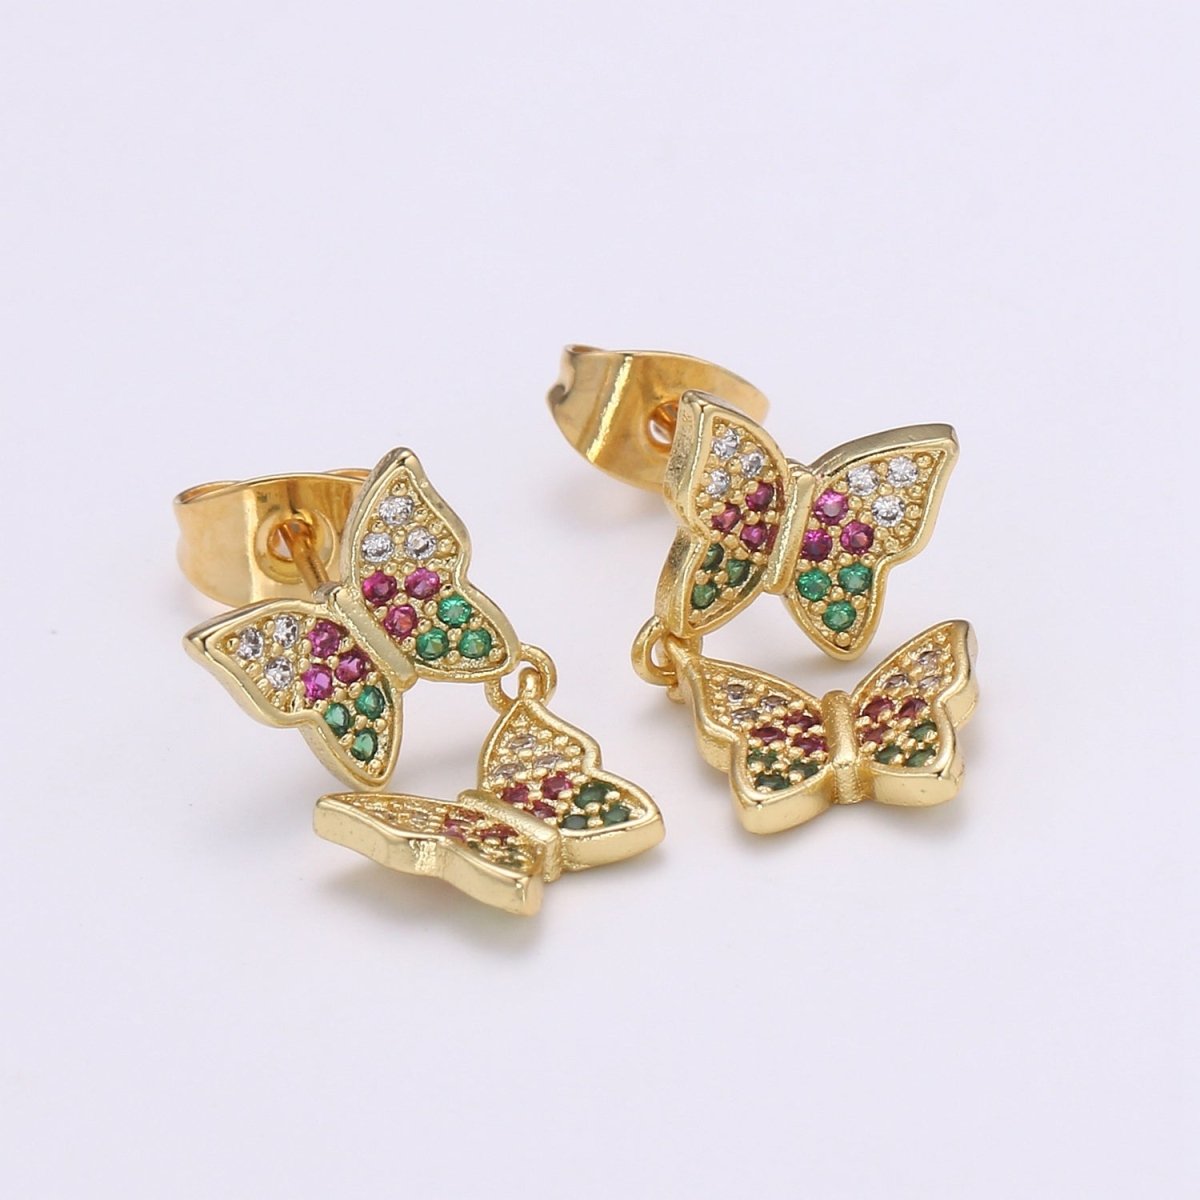 Butterfly Earring 24K Gold Pave Cz Stud Earring Micro Pave Animal Jewelry for Birthday Gift Dangle Mariposa Monarch Earring Q-497 - DLUXCA